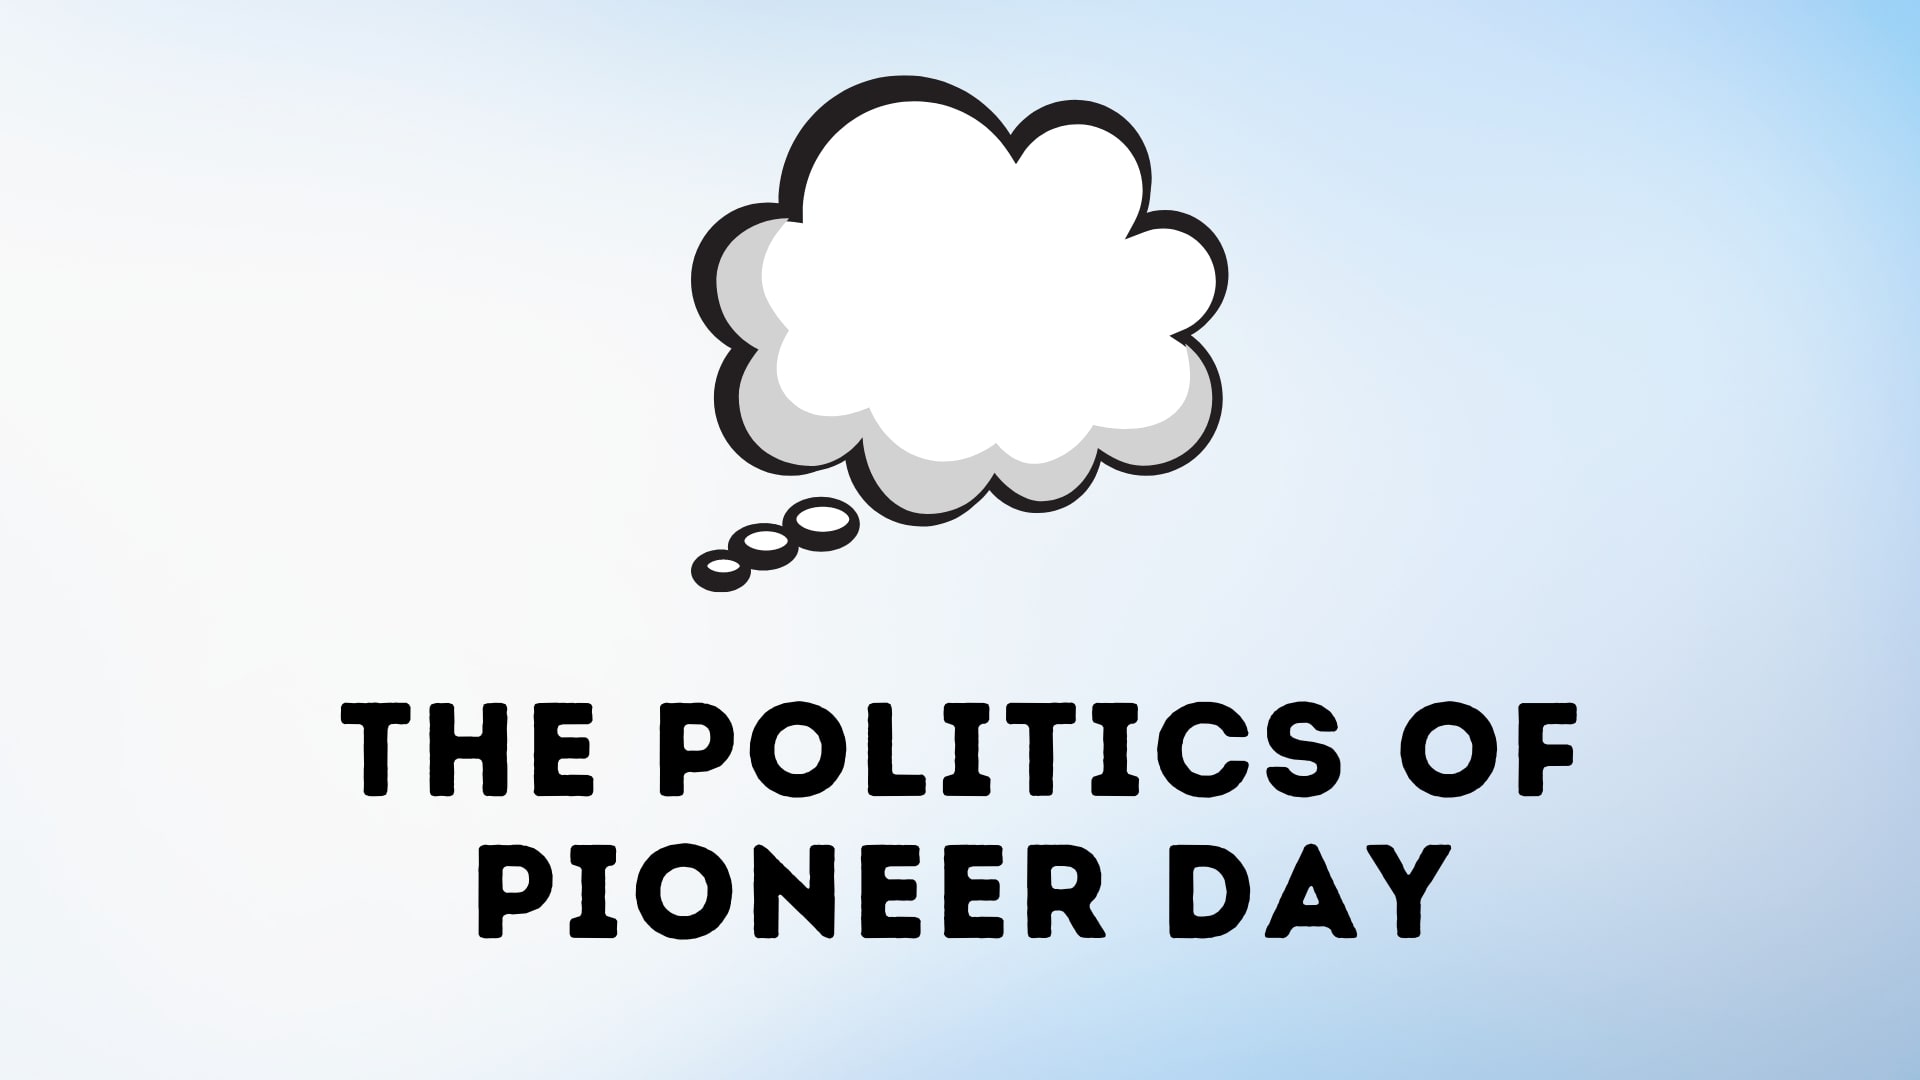 The Politics of Pioneer Day